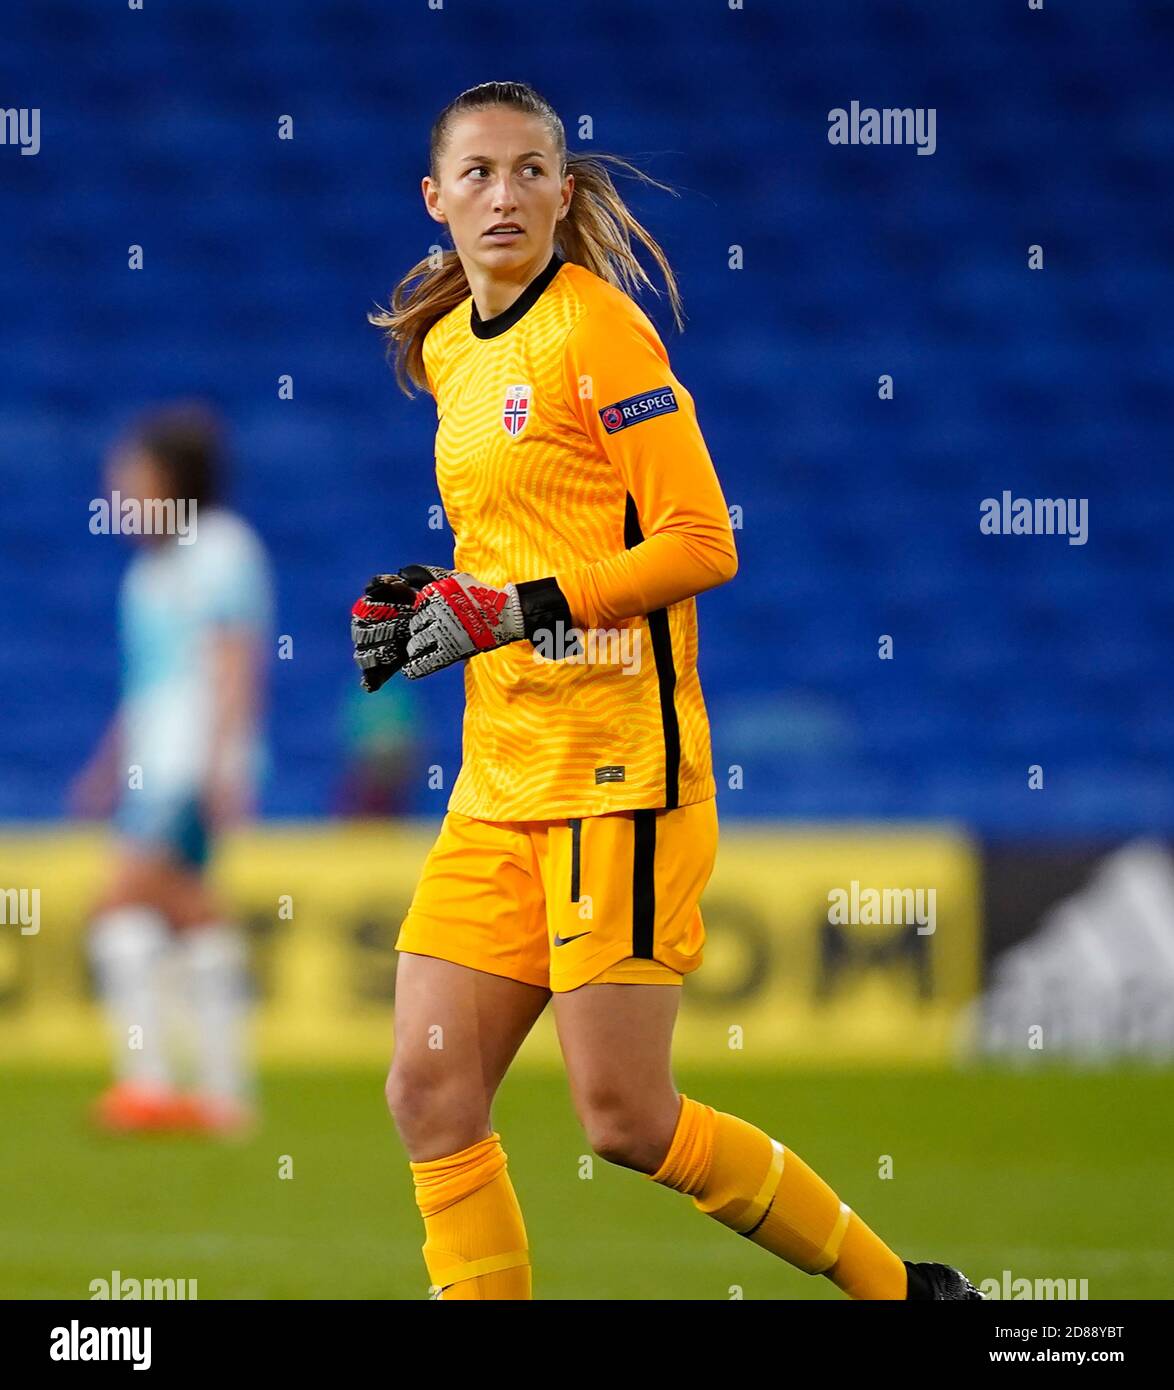 Cardiff, UK. 27th Oct, 2020. Cecille Fiskerstrand Norway's goalkeeper seen in action during the Wales v Norway UEFA Women's EURO 2022 Qualifying Round at Cardiff Stadium.( final score; Norway 1:0 Wales ) Credit: SOPA Images Limited/Alamy Live News Stock Photo